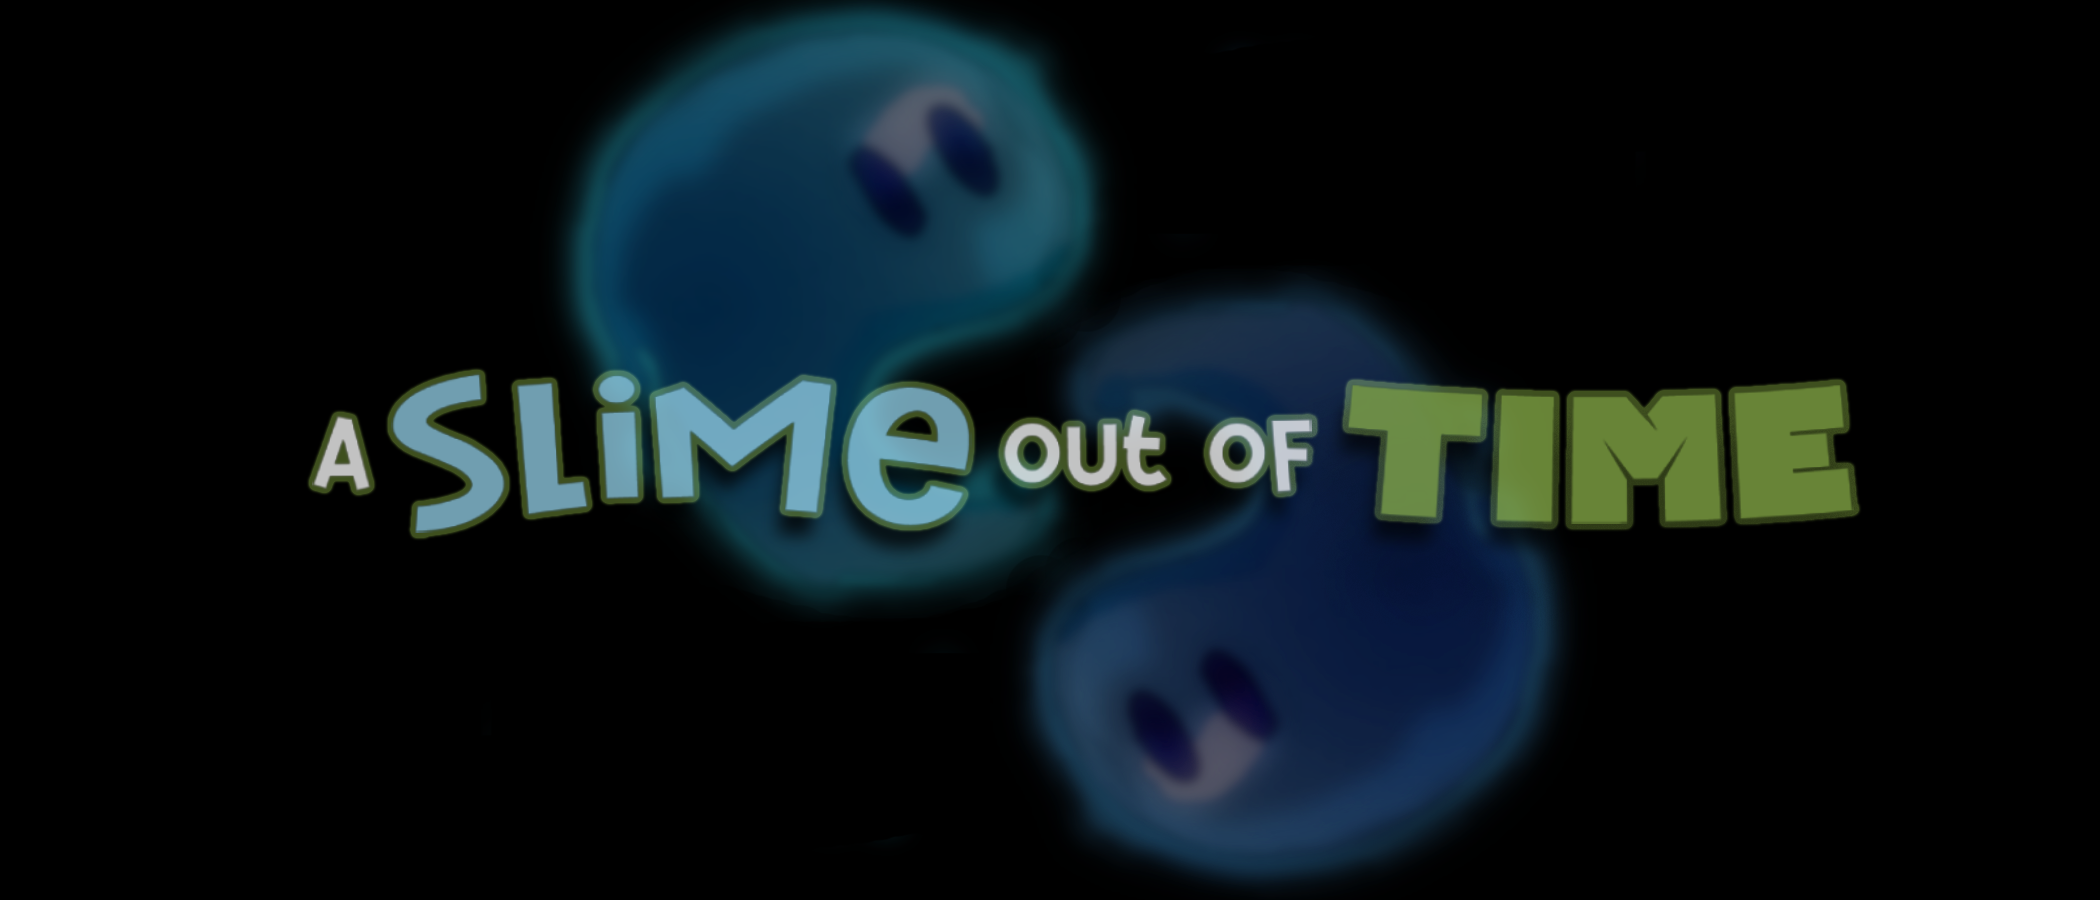 A Slime Out Of Time